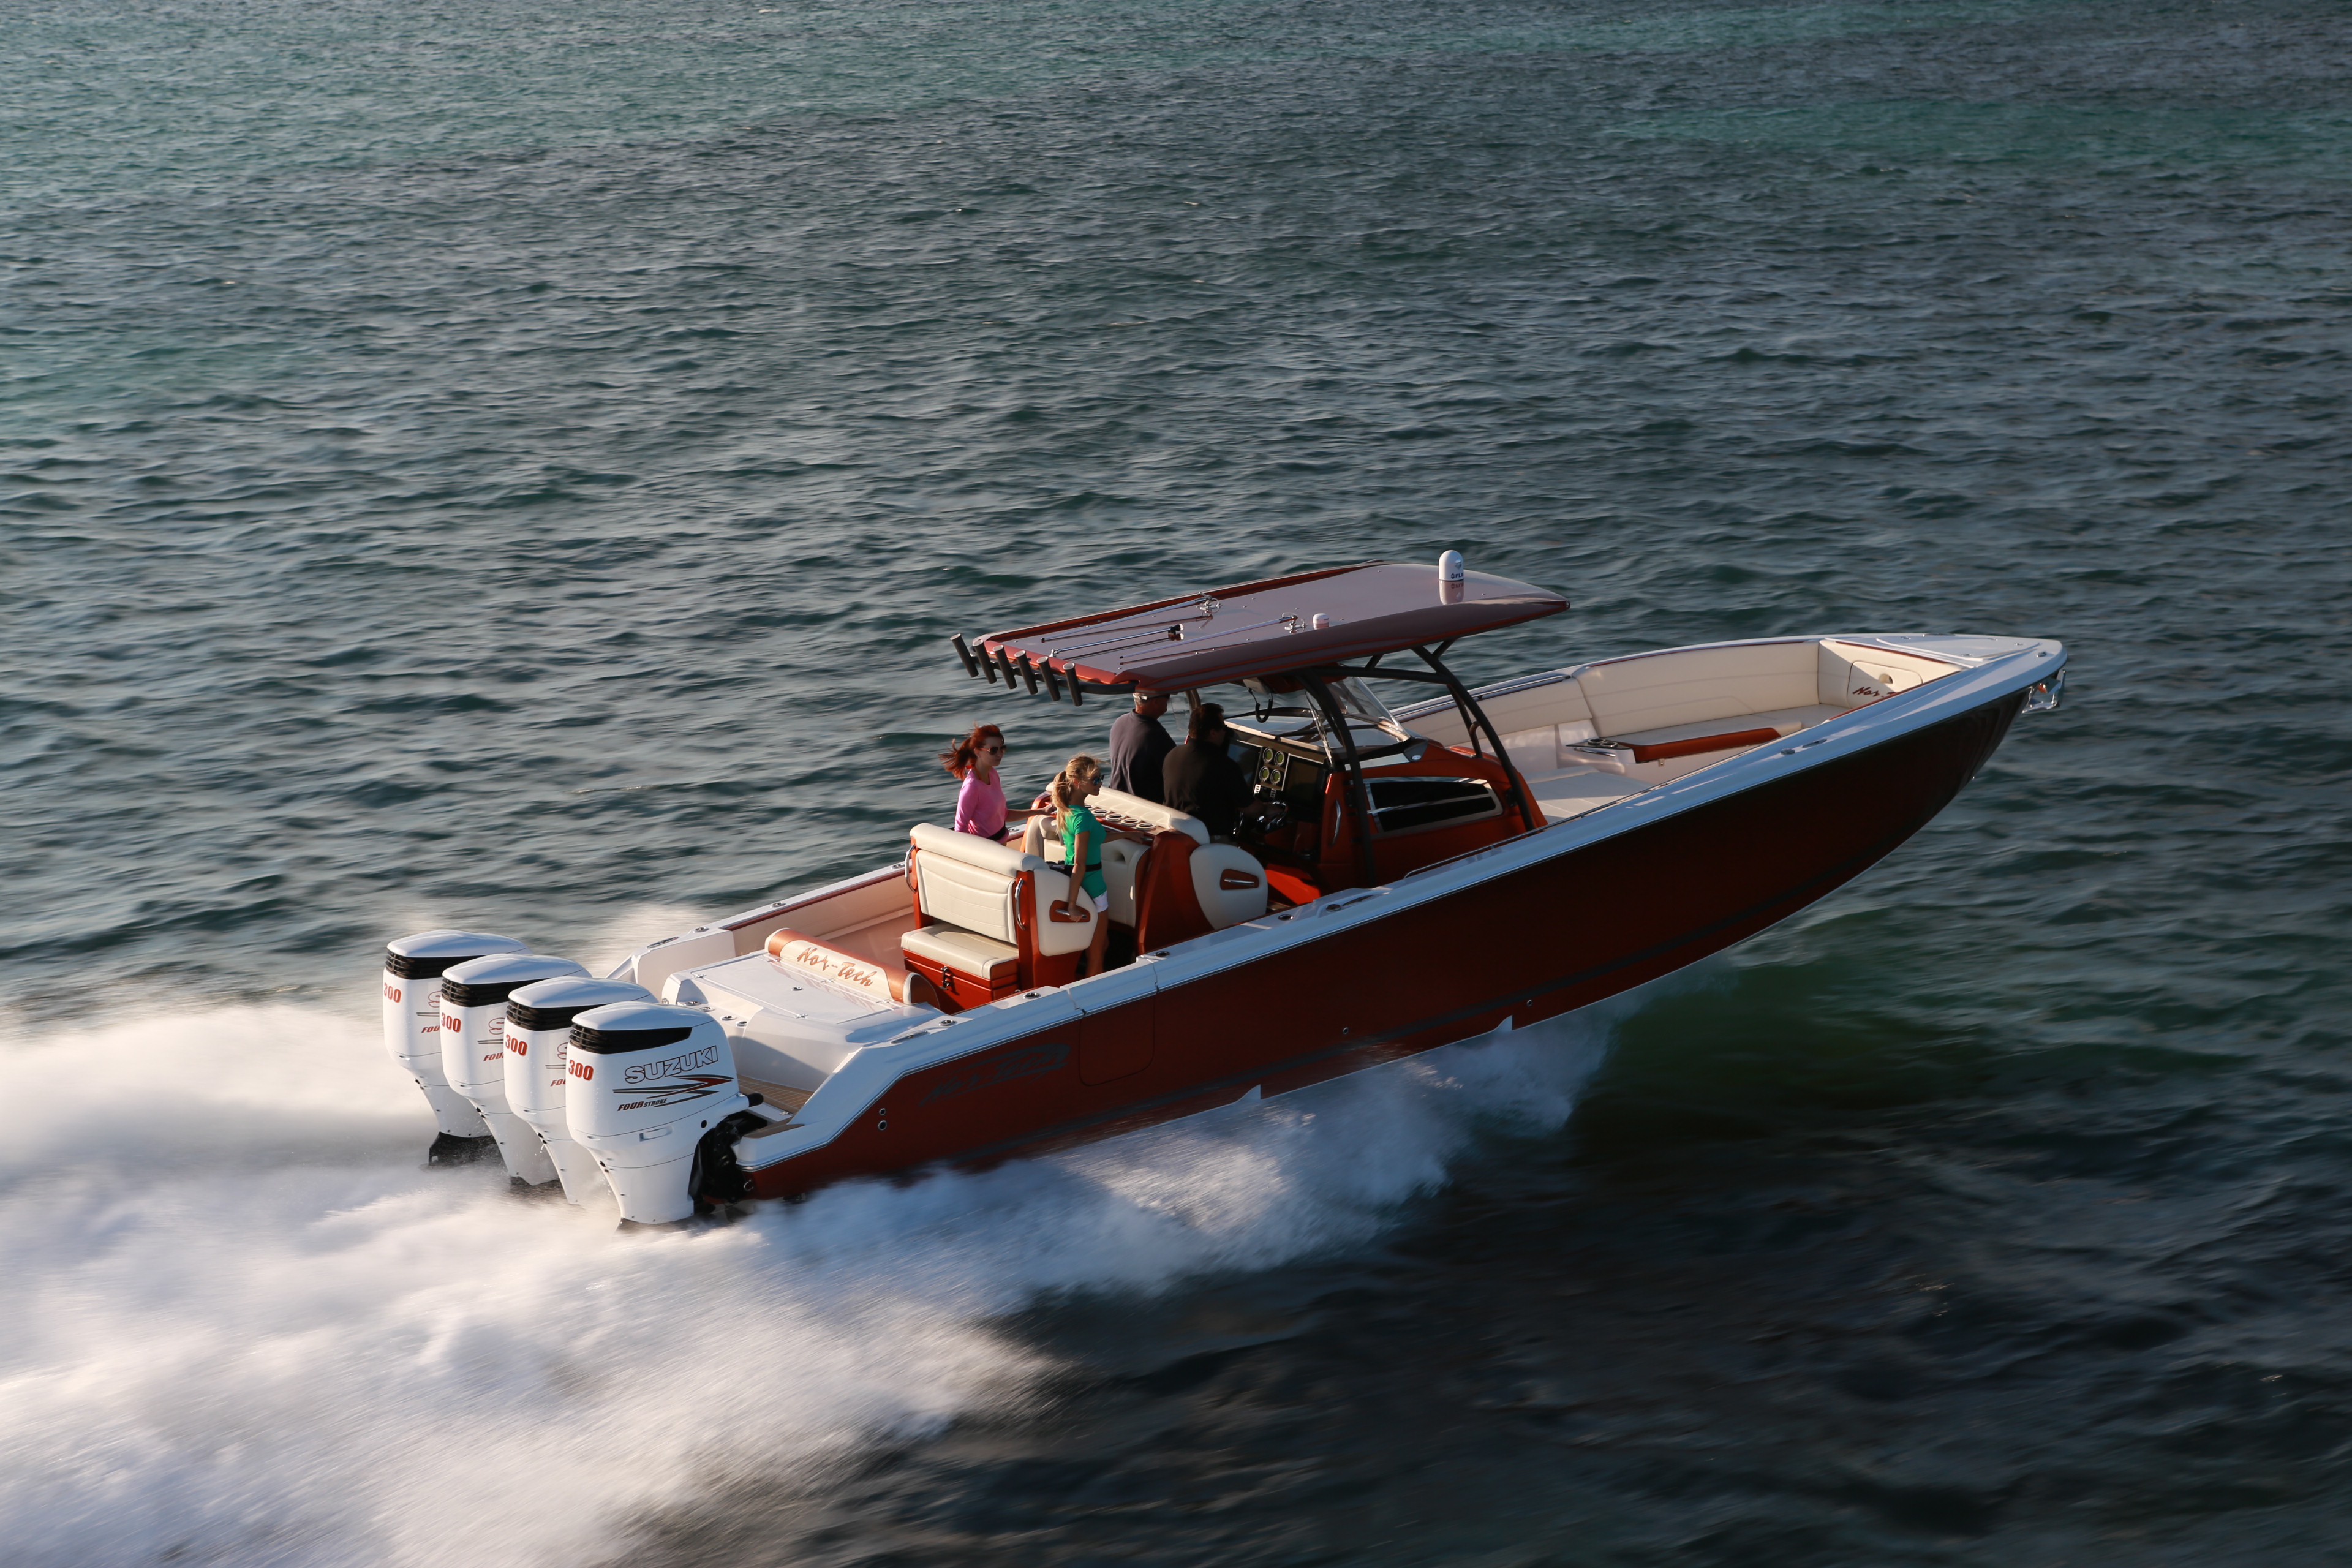 Suzuki Marine set the standards as the most reliable outboard